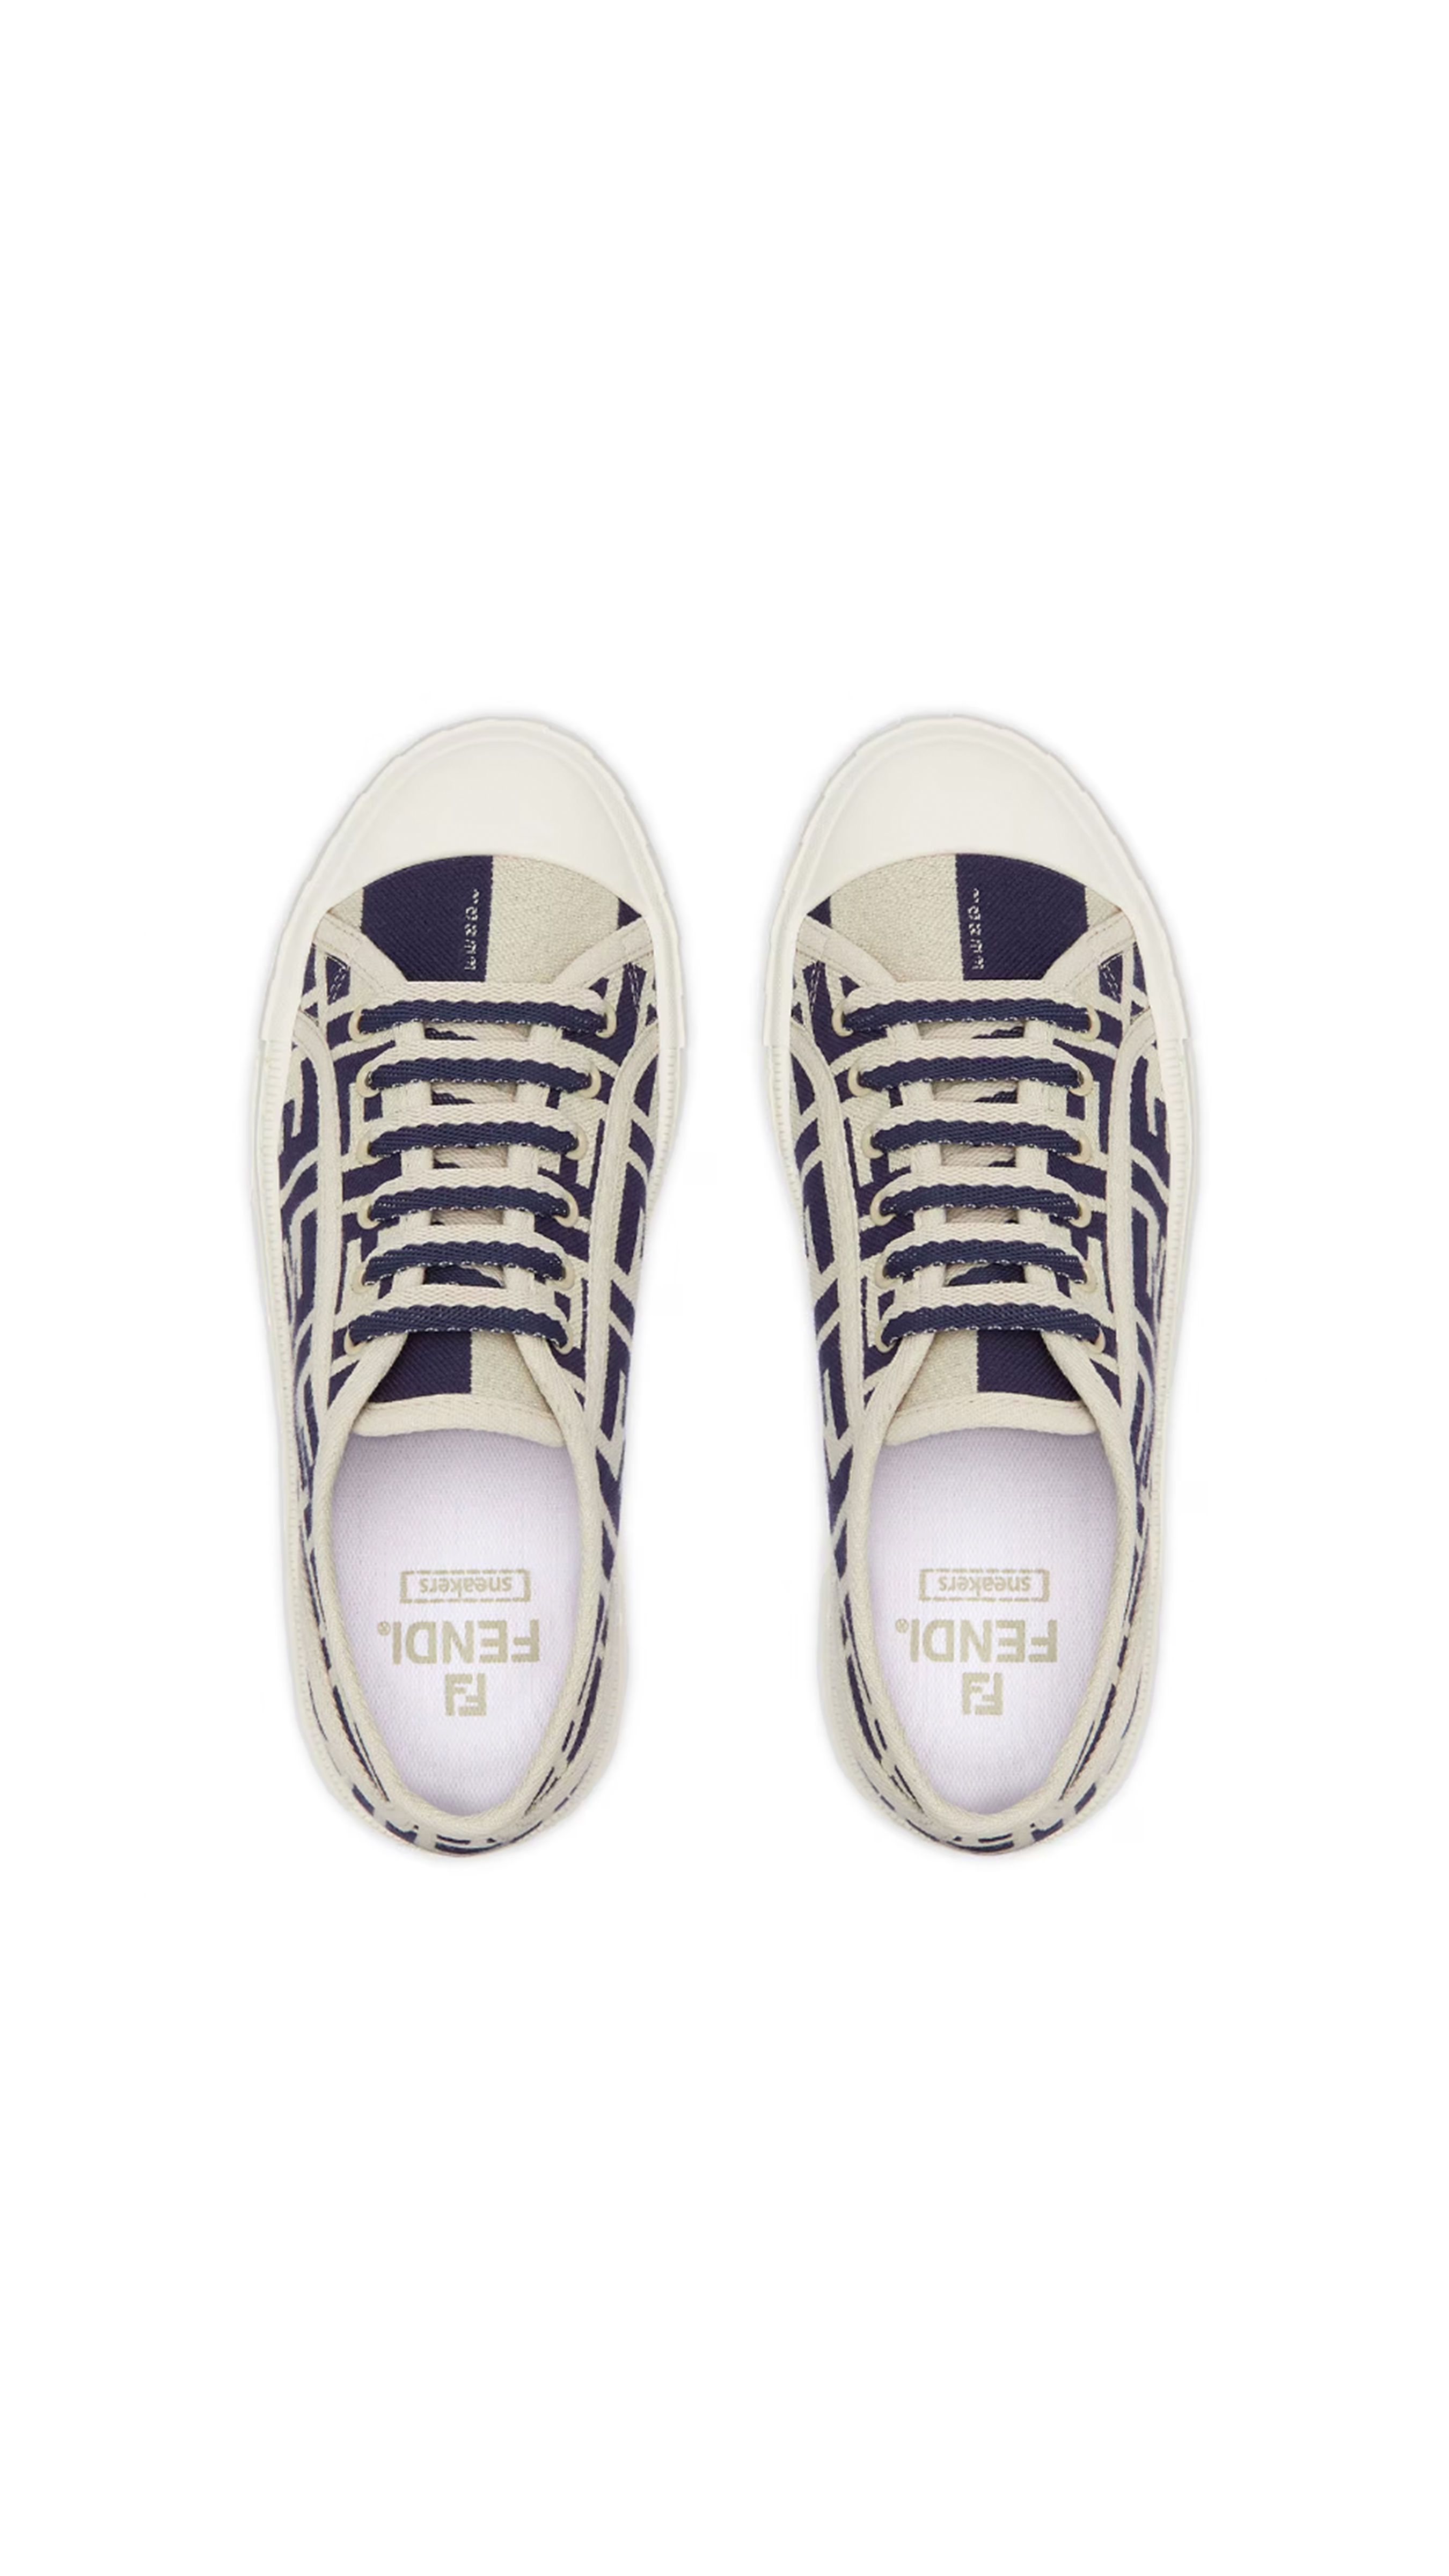 FF Canvas Domino Sneakers - White/Navy